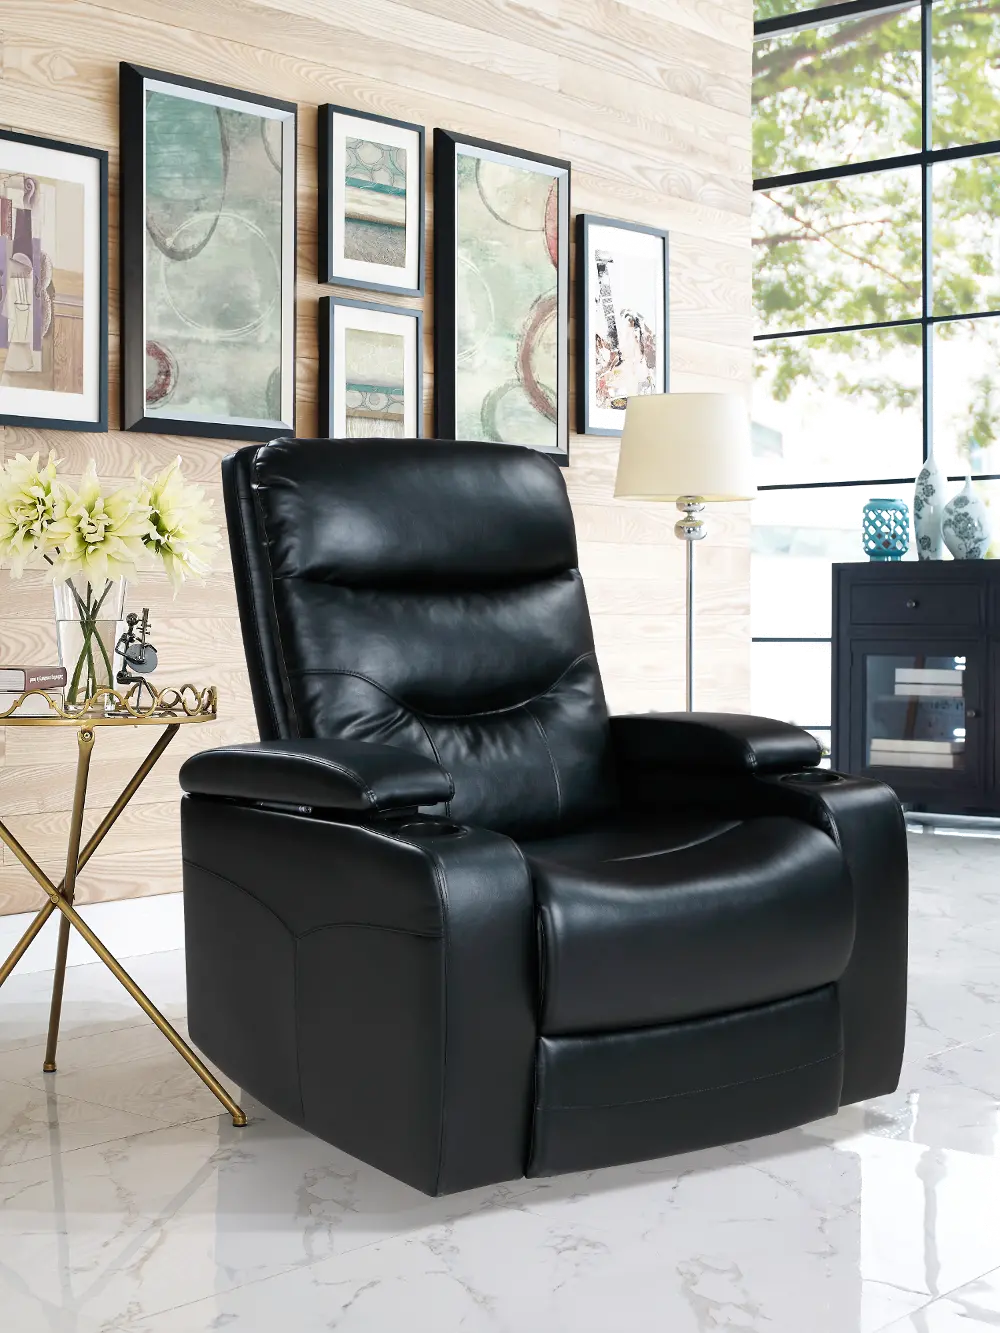 RA-SPRCP3001 Black Relax A Lounger Faux Leather Recliner - Spencer-1